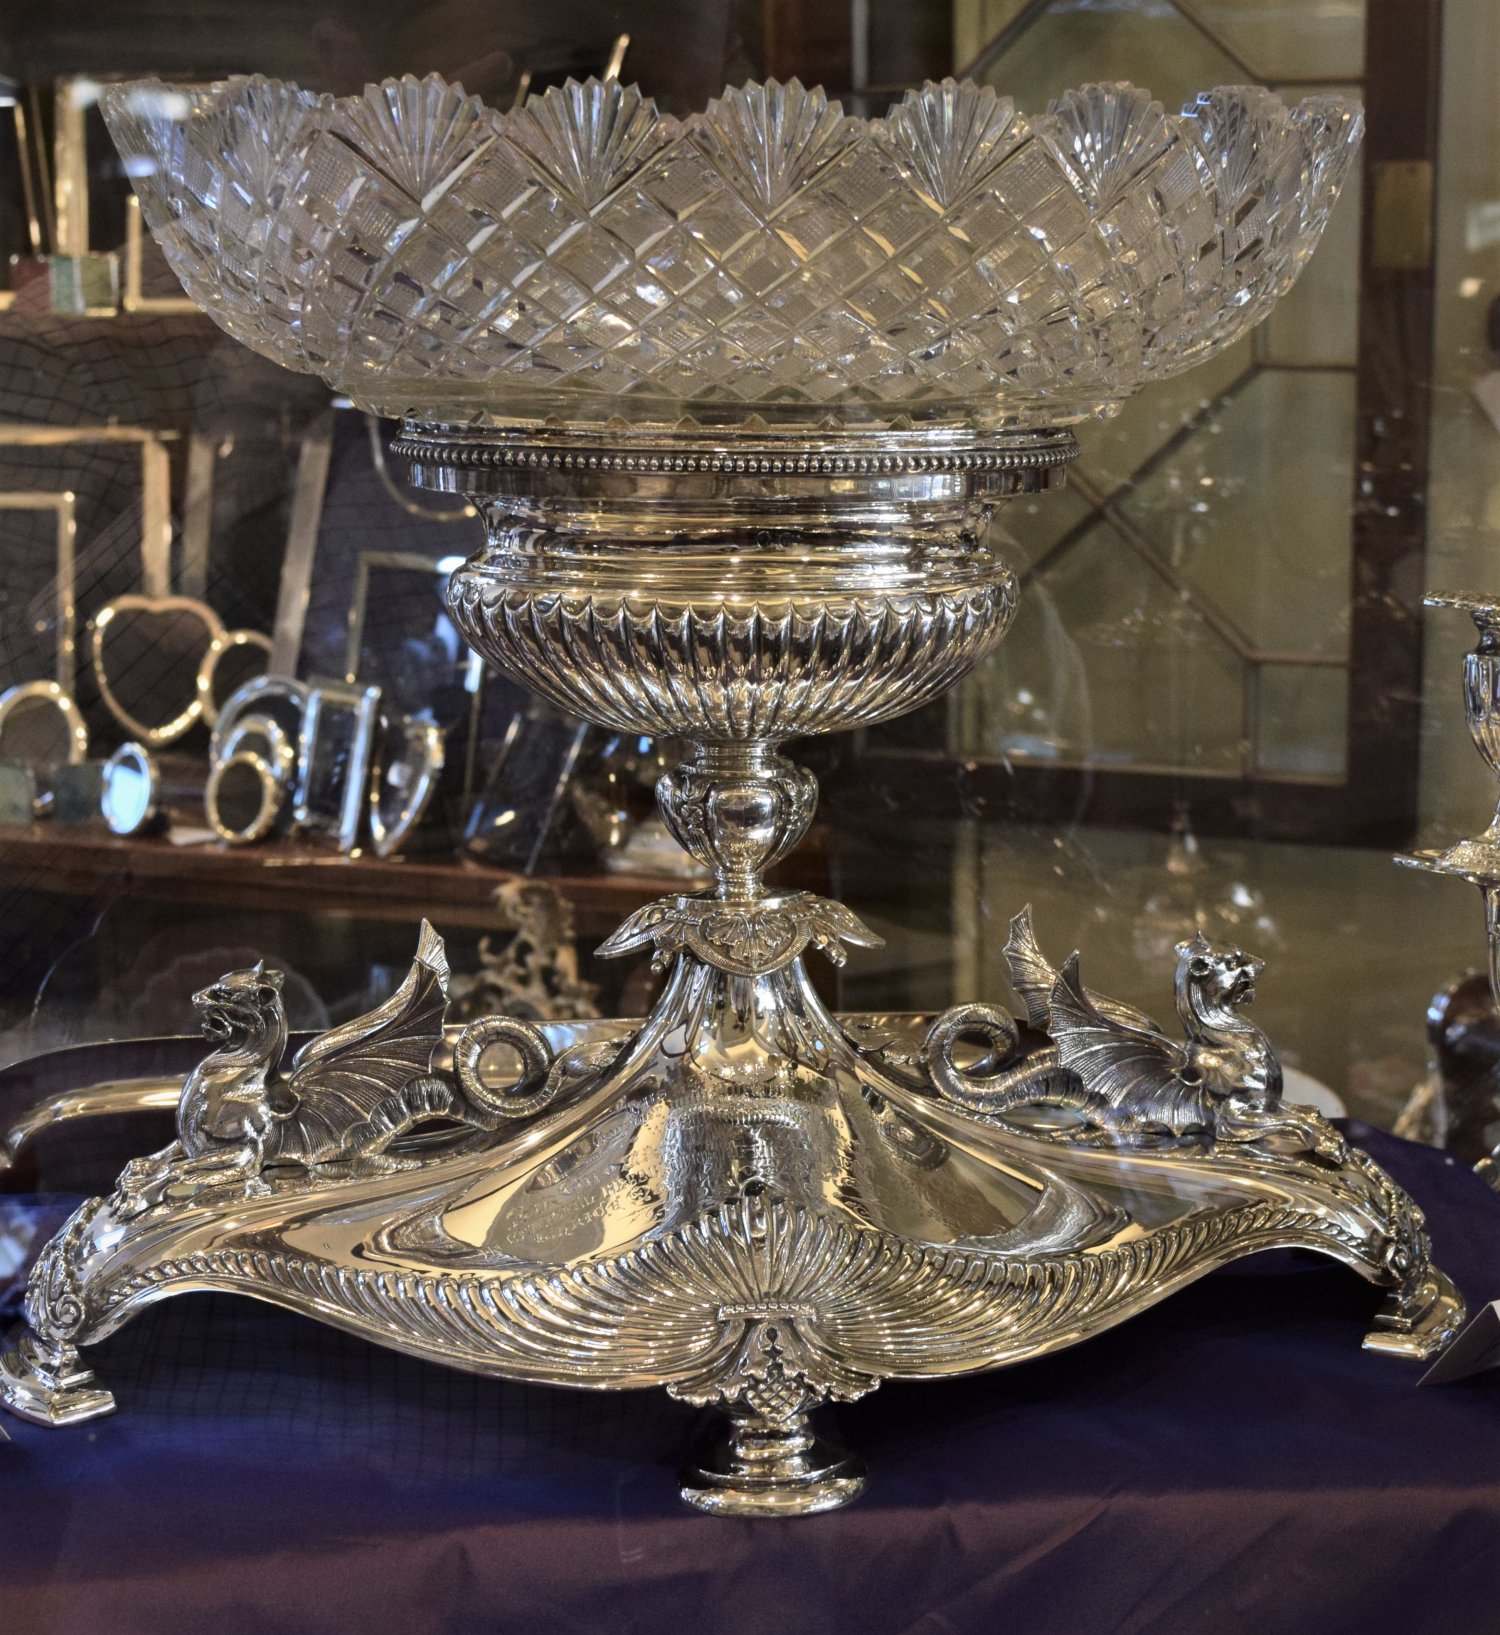 Sterling Silver Table Setting/Centrepiece and Candelabra by Frederick Elkington